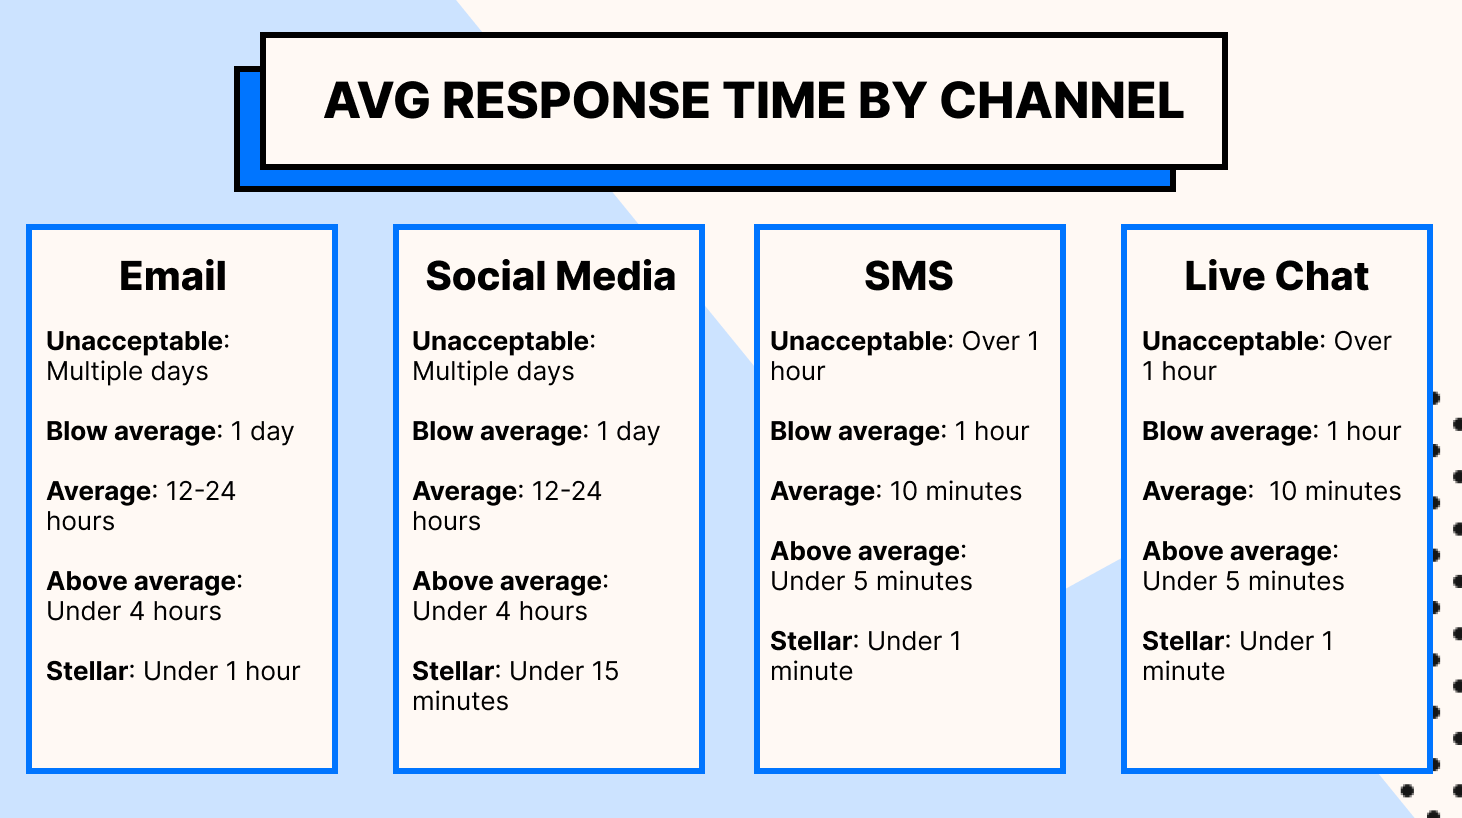 Average response times by channel